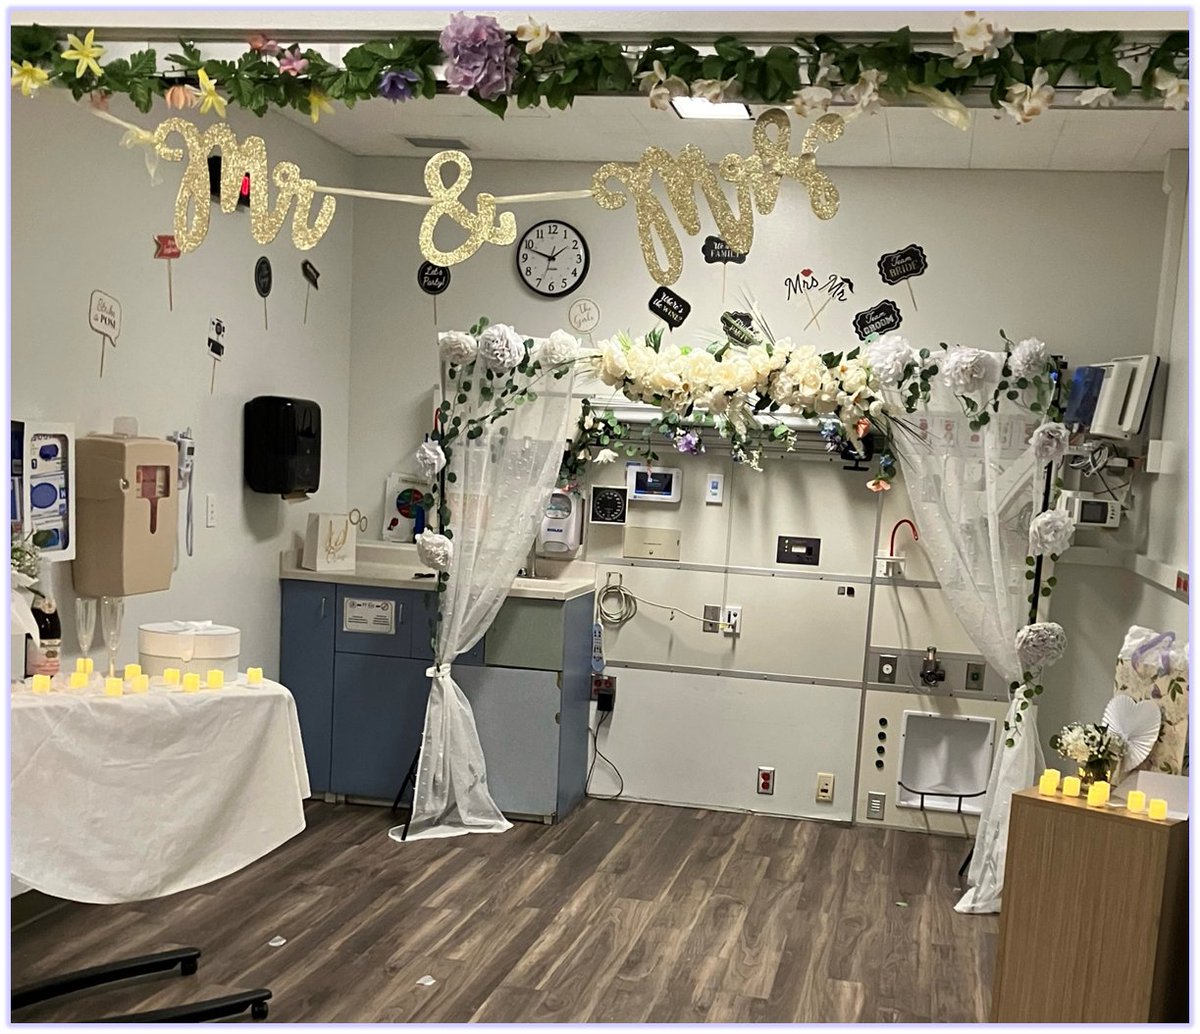 With metastatic cancer, the patient's time was unfortunately running out. Social work, nursing, doctors came together to make his final wish of marrying the love of his life come true. @3wishesproject_ #ICUwedding